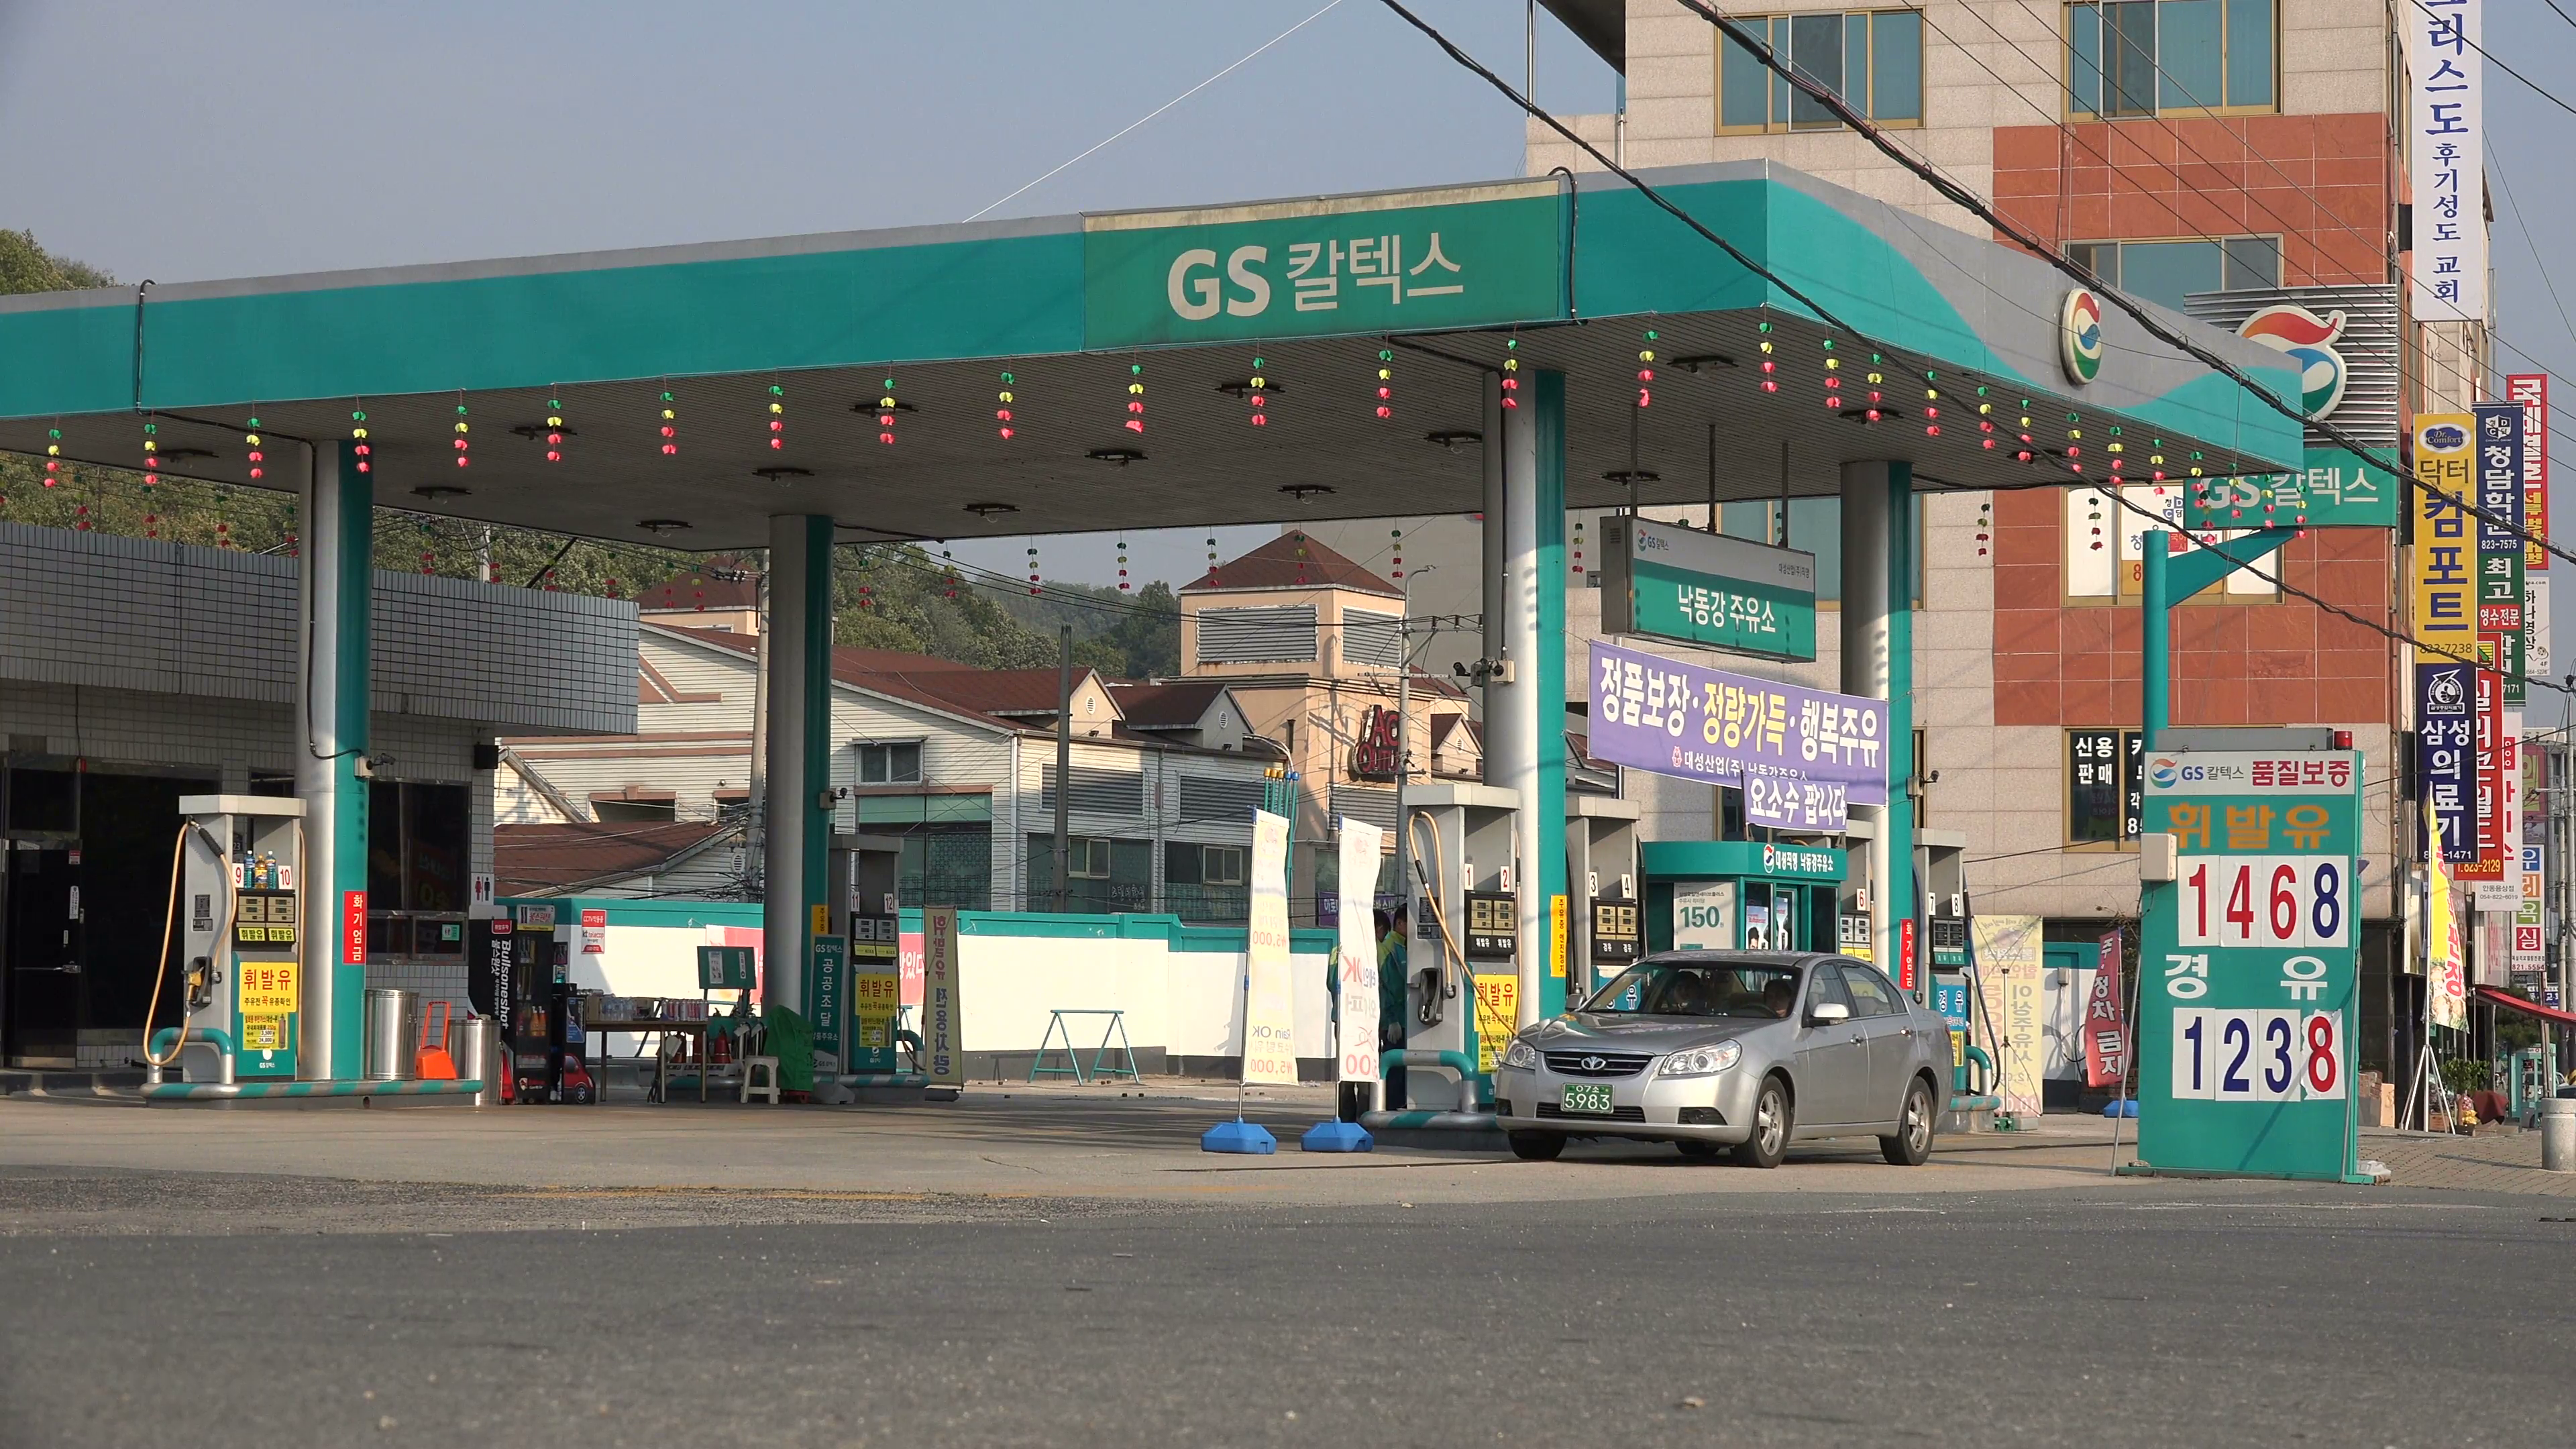 Petrol pump in South Korea, a country heavily relying on oil (and ...